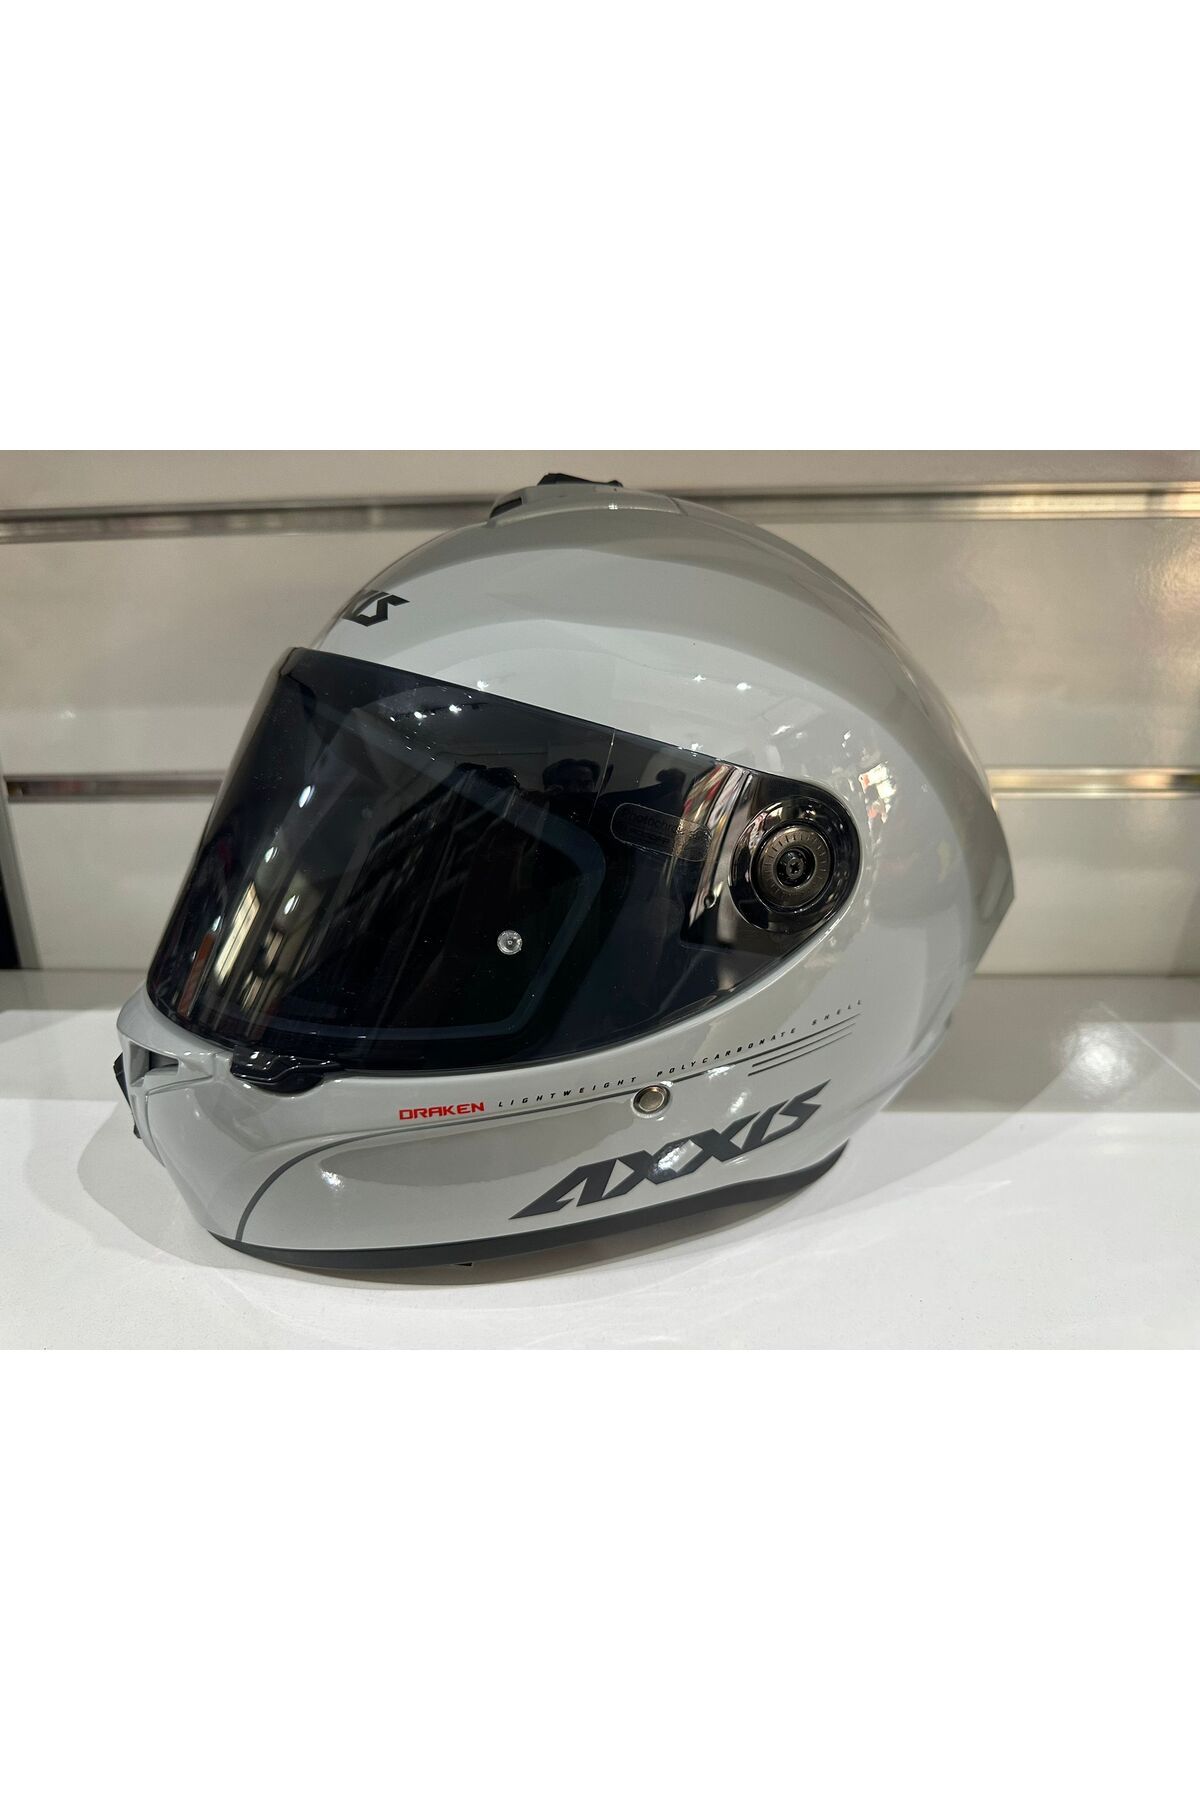 Axxis KASK AXXİS DRAKEN S SOLİD V2 PARLAK NARDO GREY